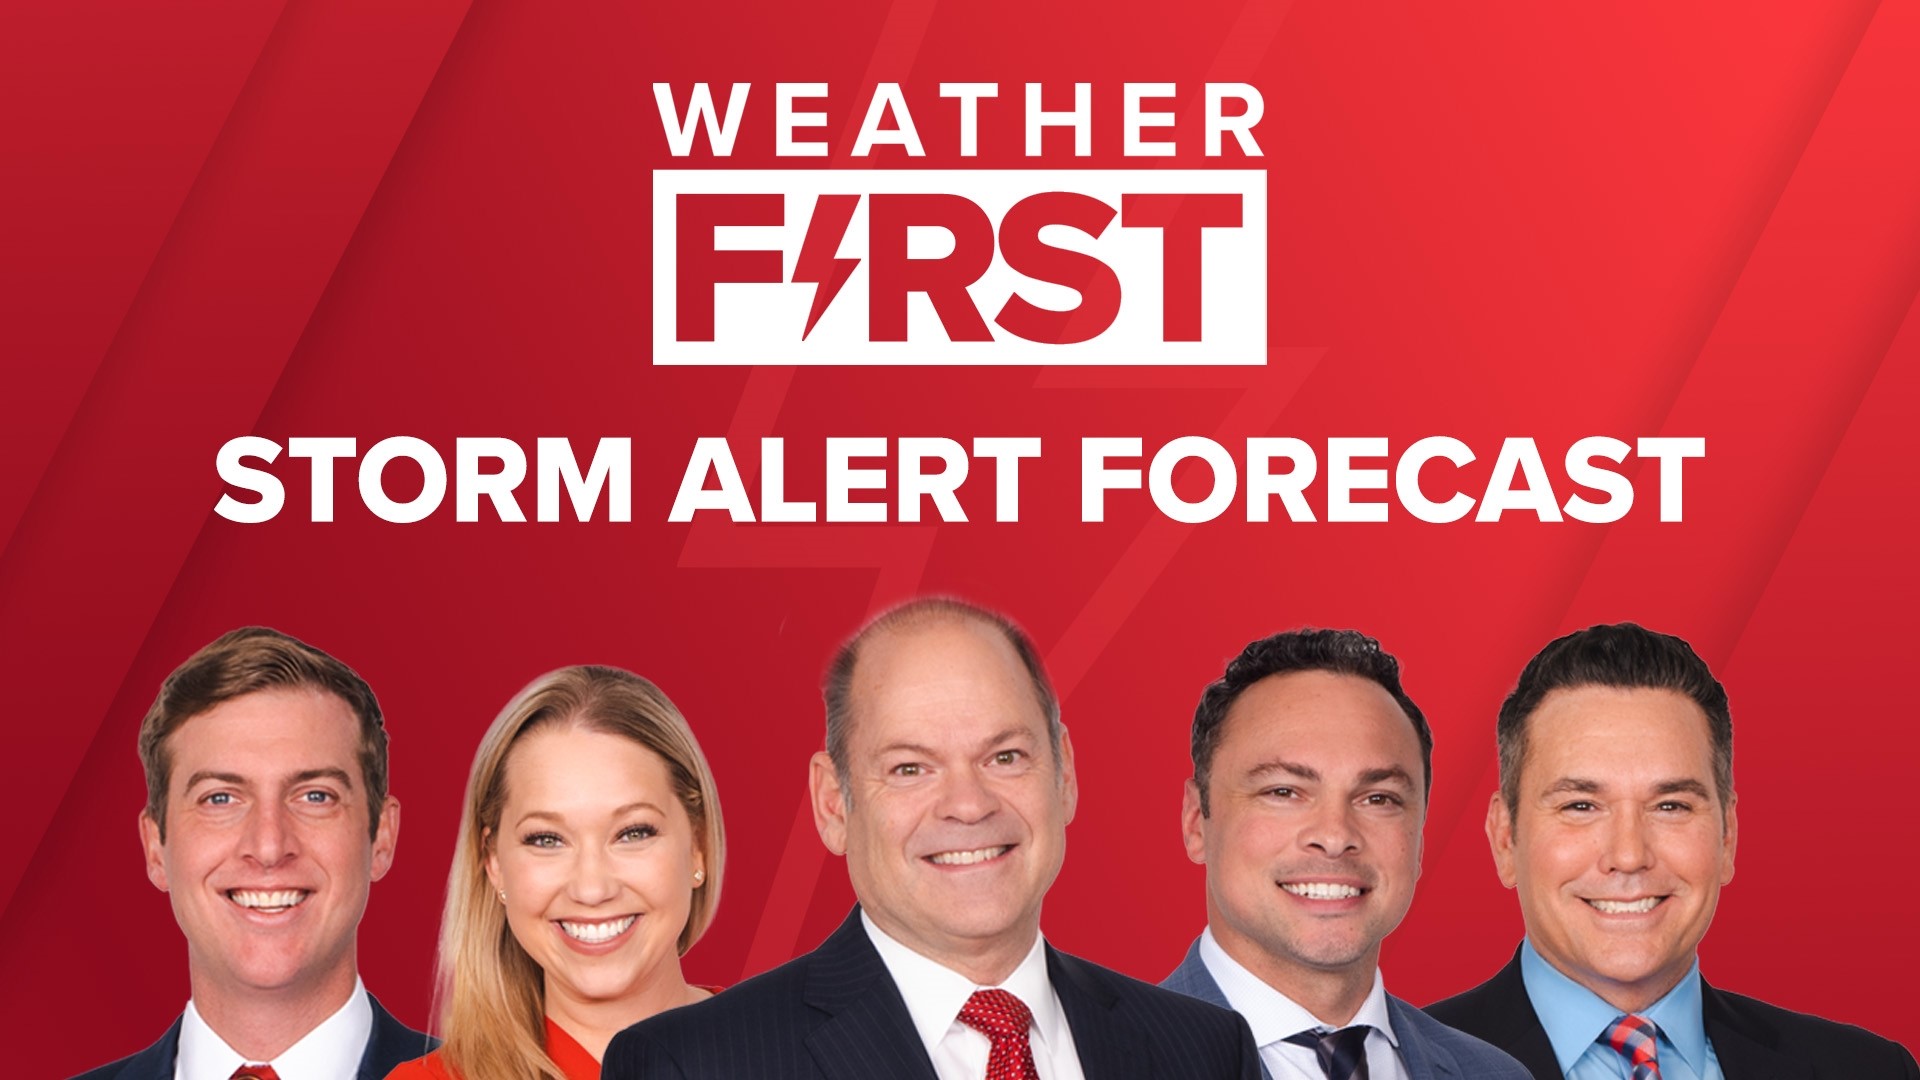 Thursday is a Weather First Storm Alert Day as a cold front will slide through the St. Louis area, bringing with it another round of storms.